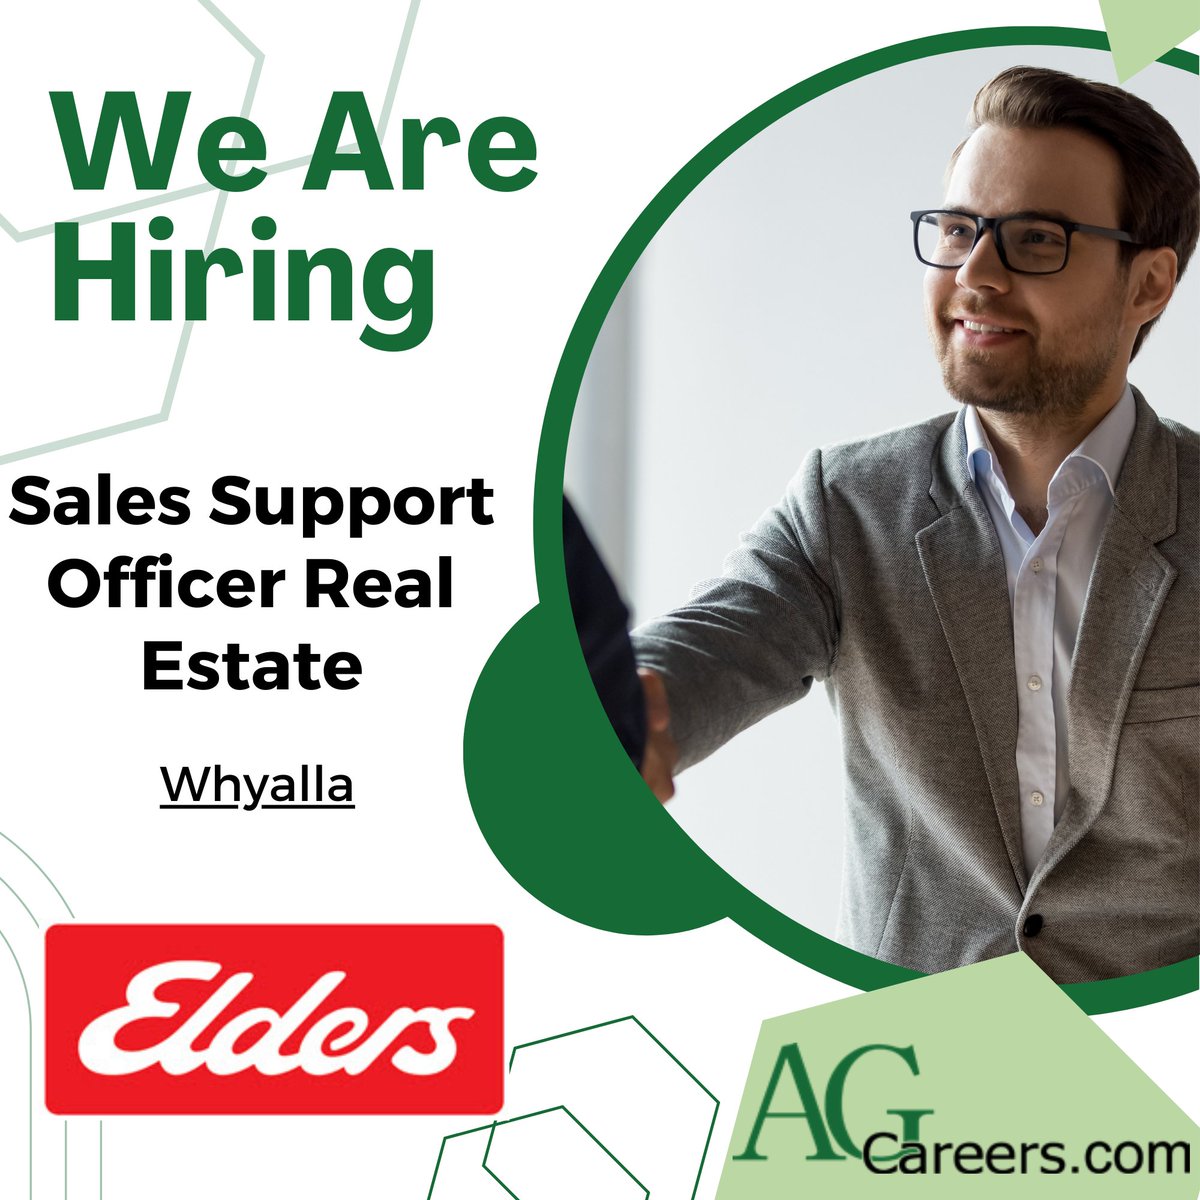 .@EldersLimited is #Hiring a #SalesSupport Officer Real Estate in #Whyalla!

Your role will operate as the backbone of the branch and support the sales teams in building relationships with clients. 

Discover more on #AgCareers: ow.ly/pane50RocE7
-